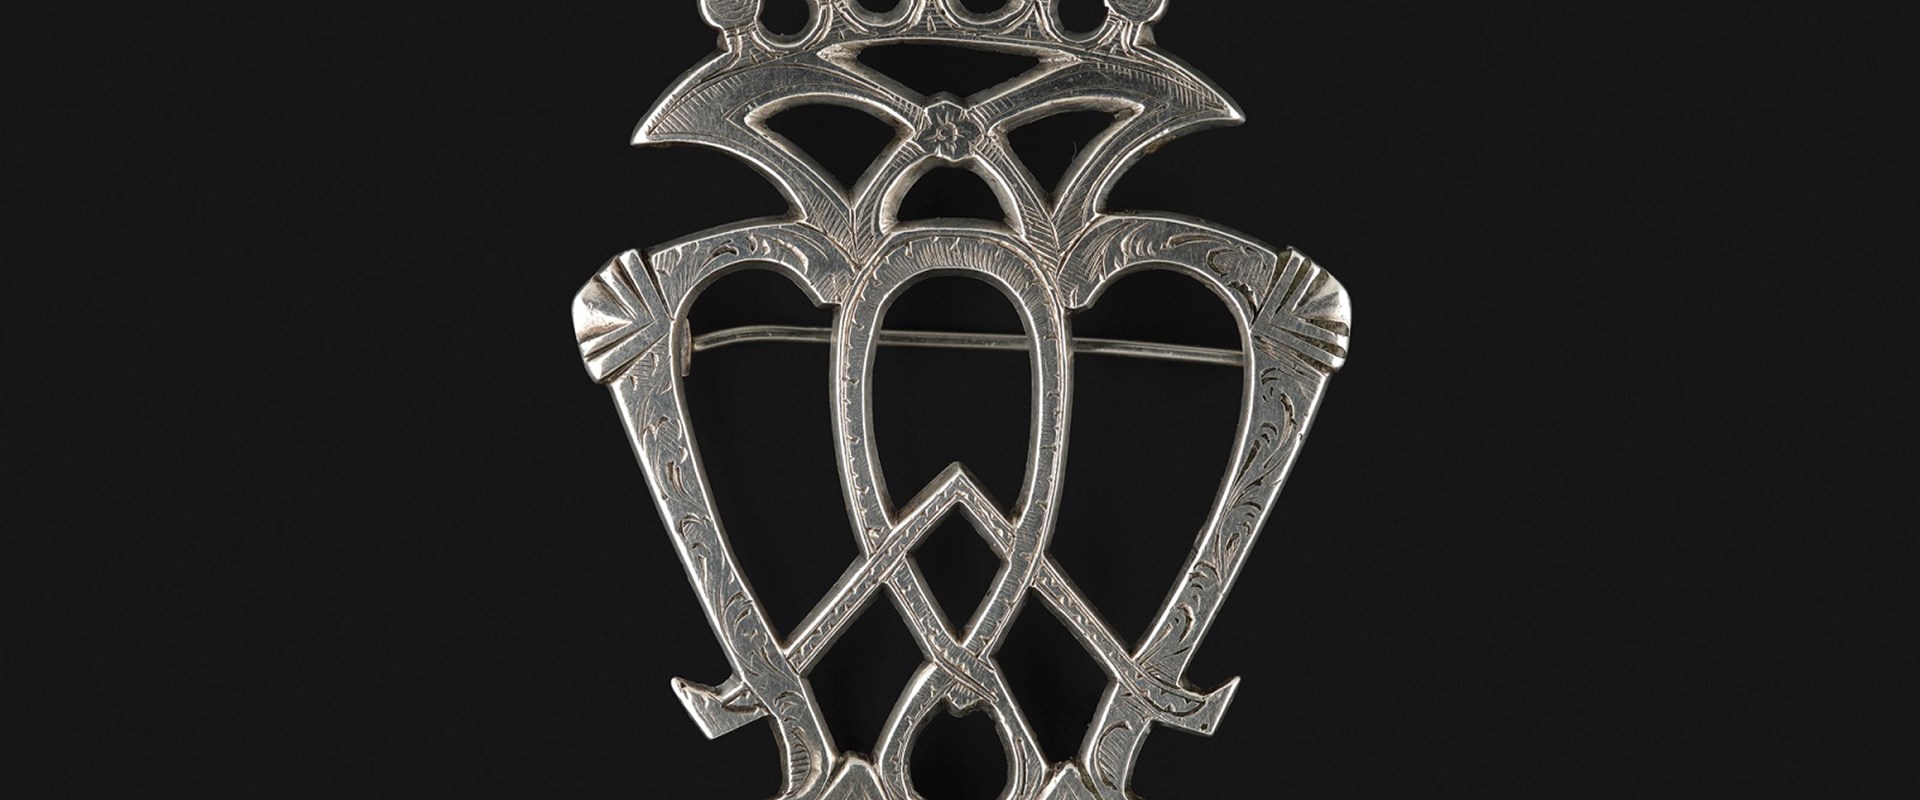 Detail of a silver heart brooch, highlighting the criss-crossed bars and crown-like top section.